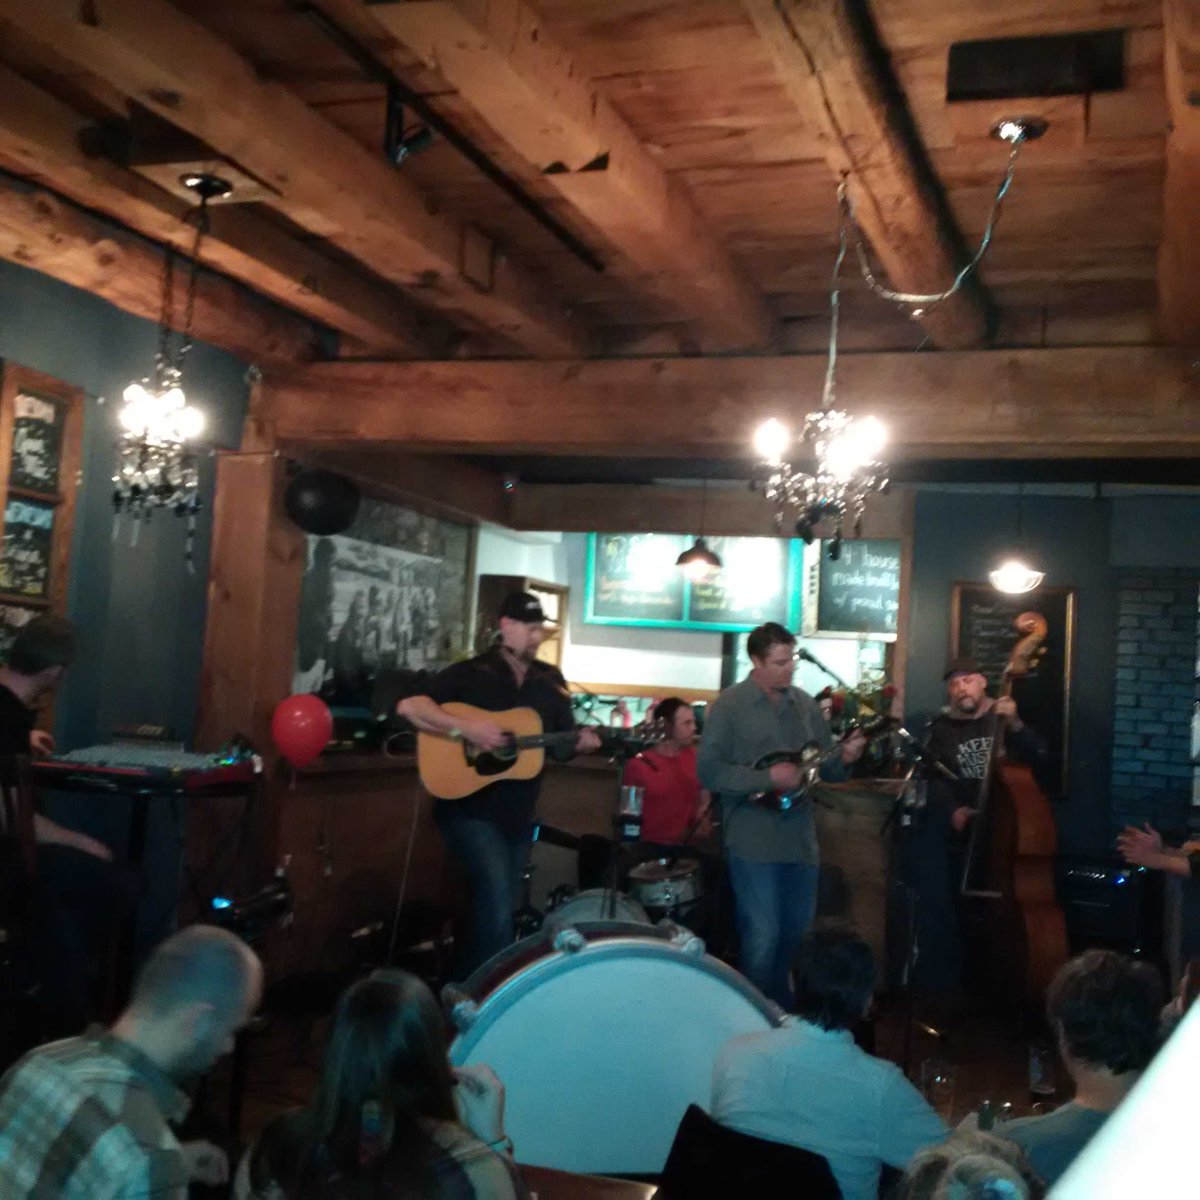 #hillsideinside @sipclub bluegrassing (yes, that's a real world) with Grand River Ramblers in #downtownguelph